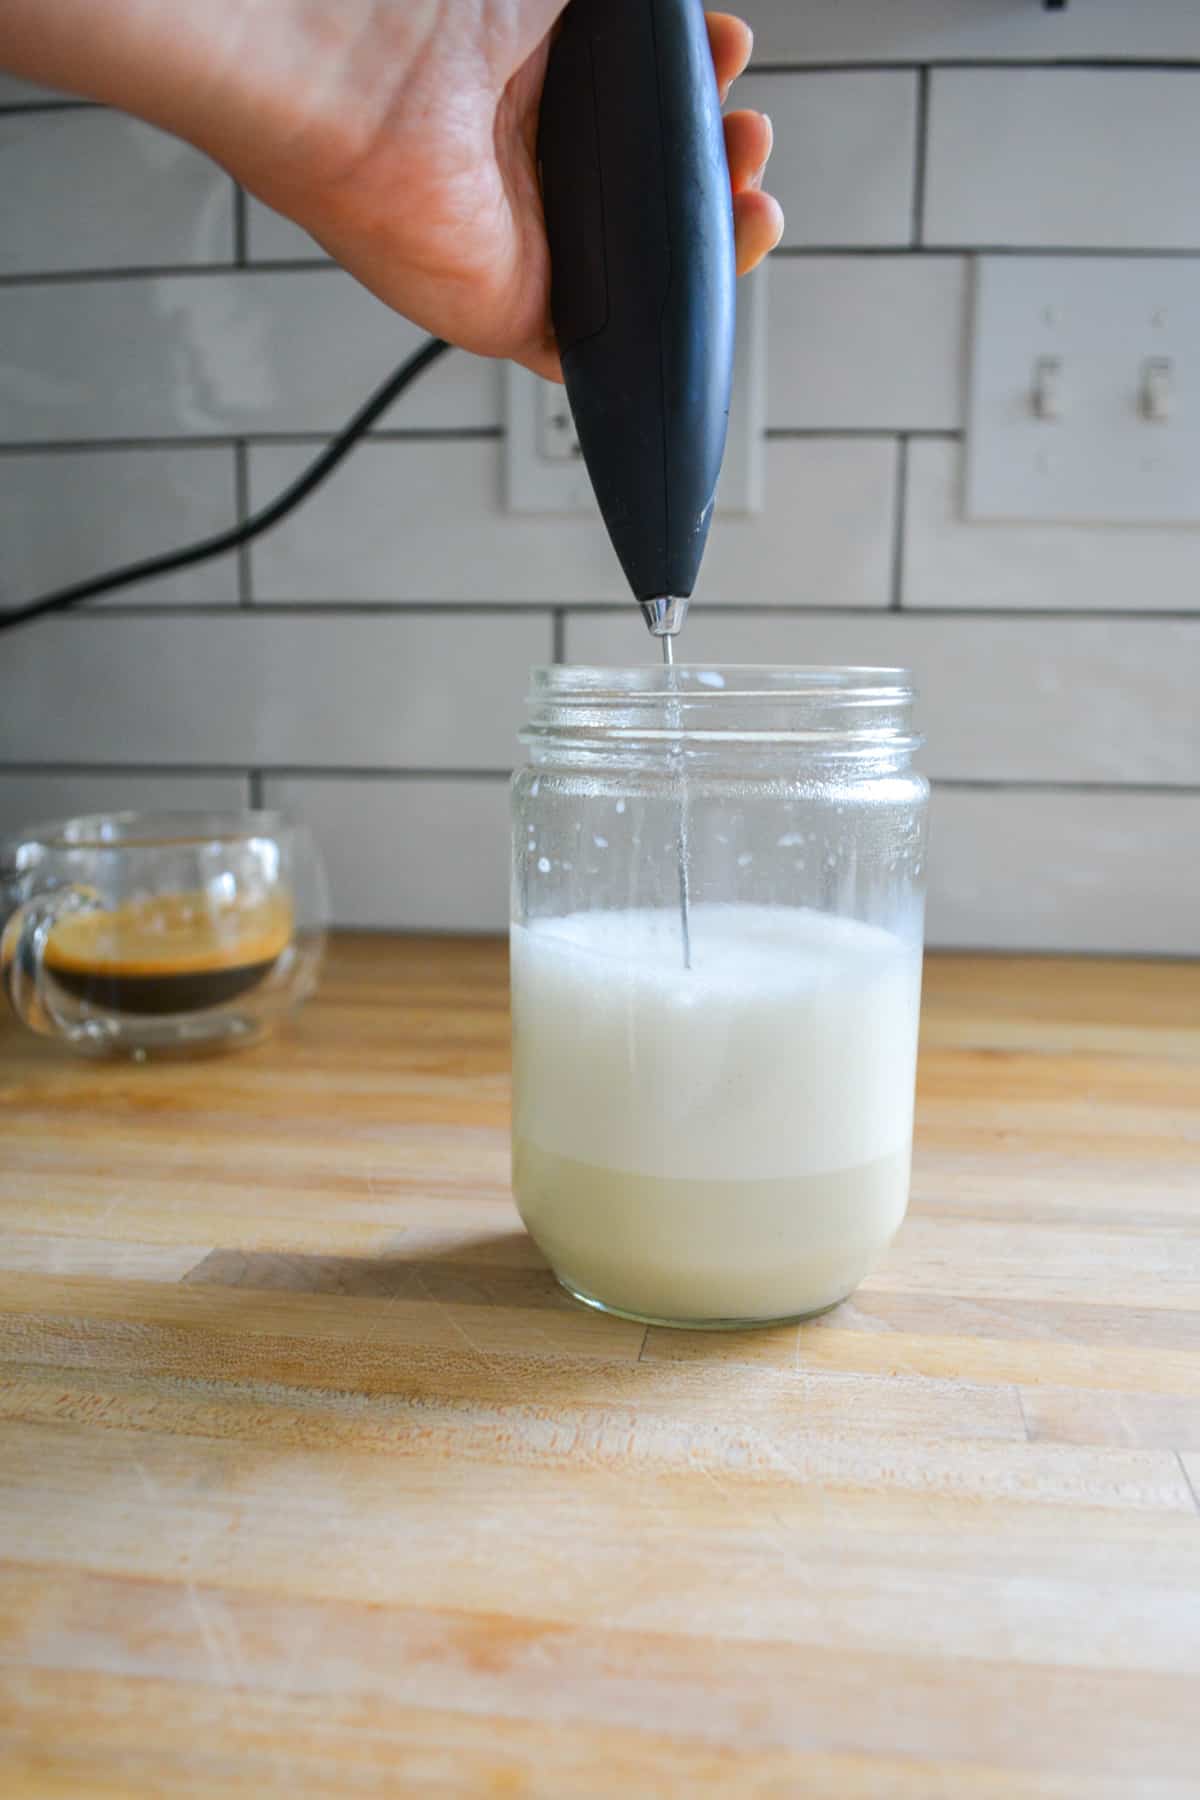 Frothing milk with a hand frother.